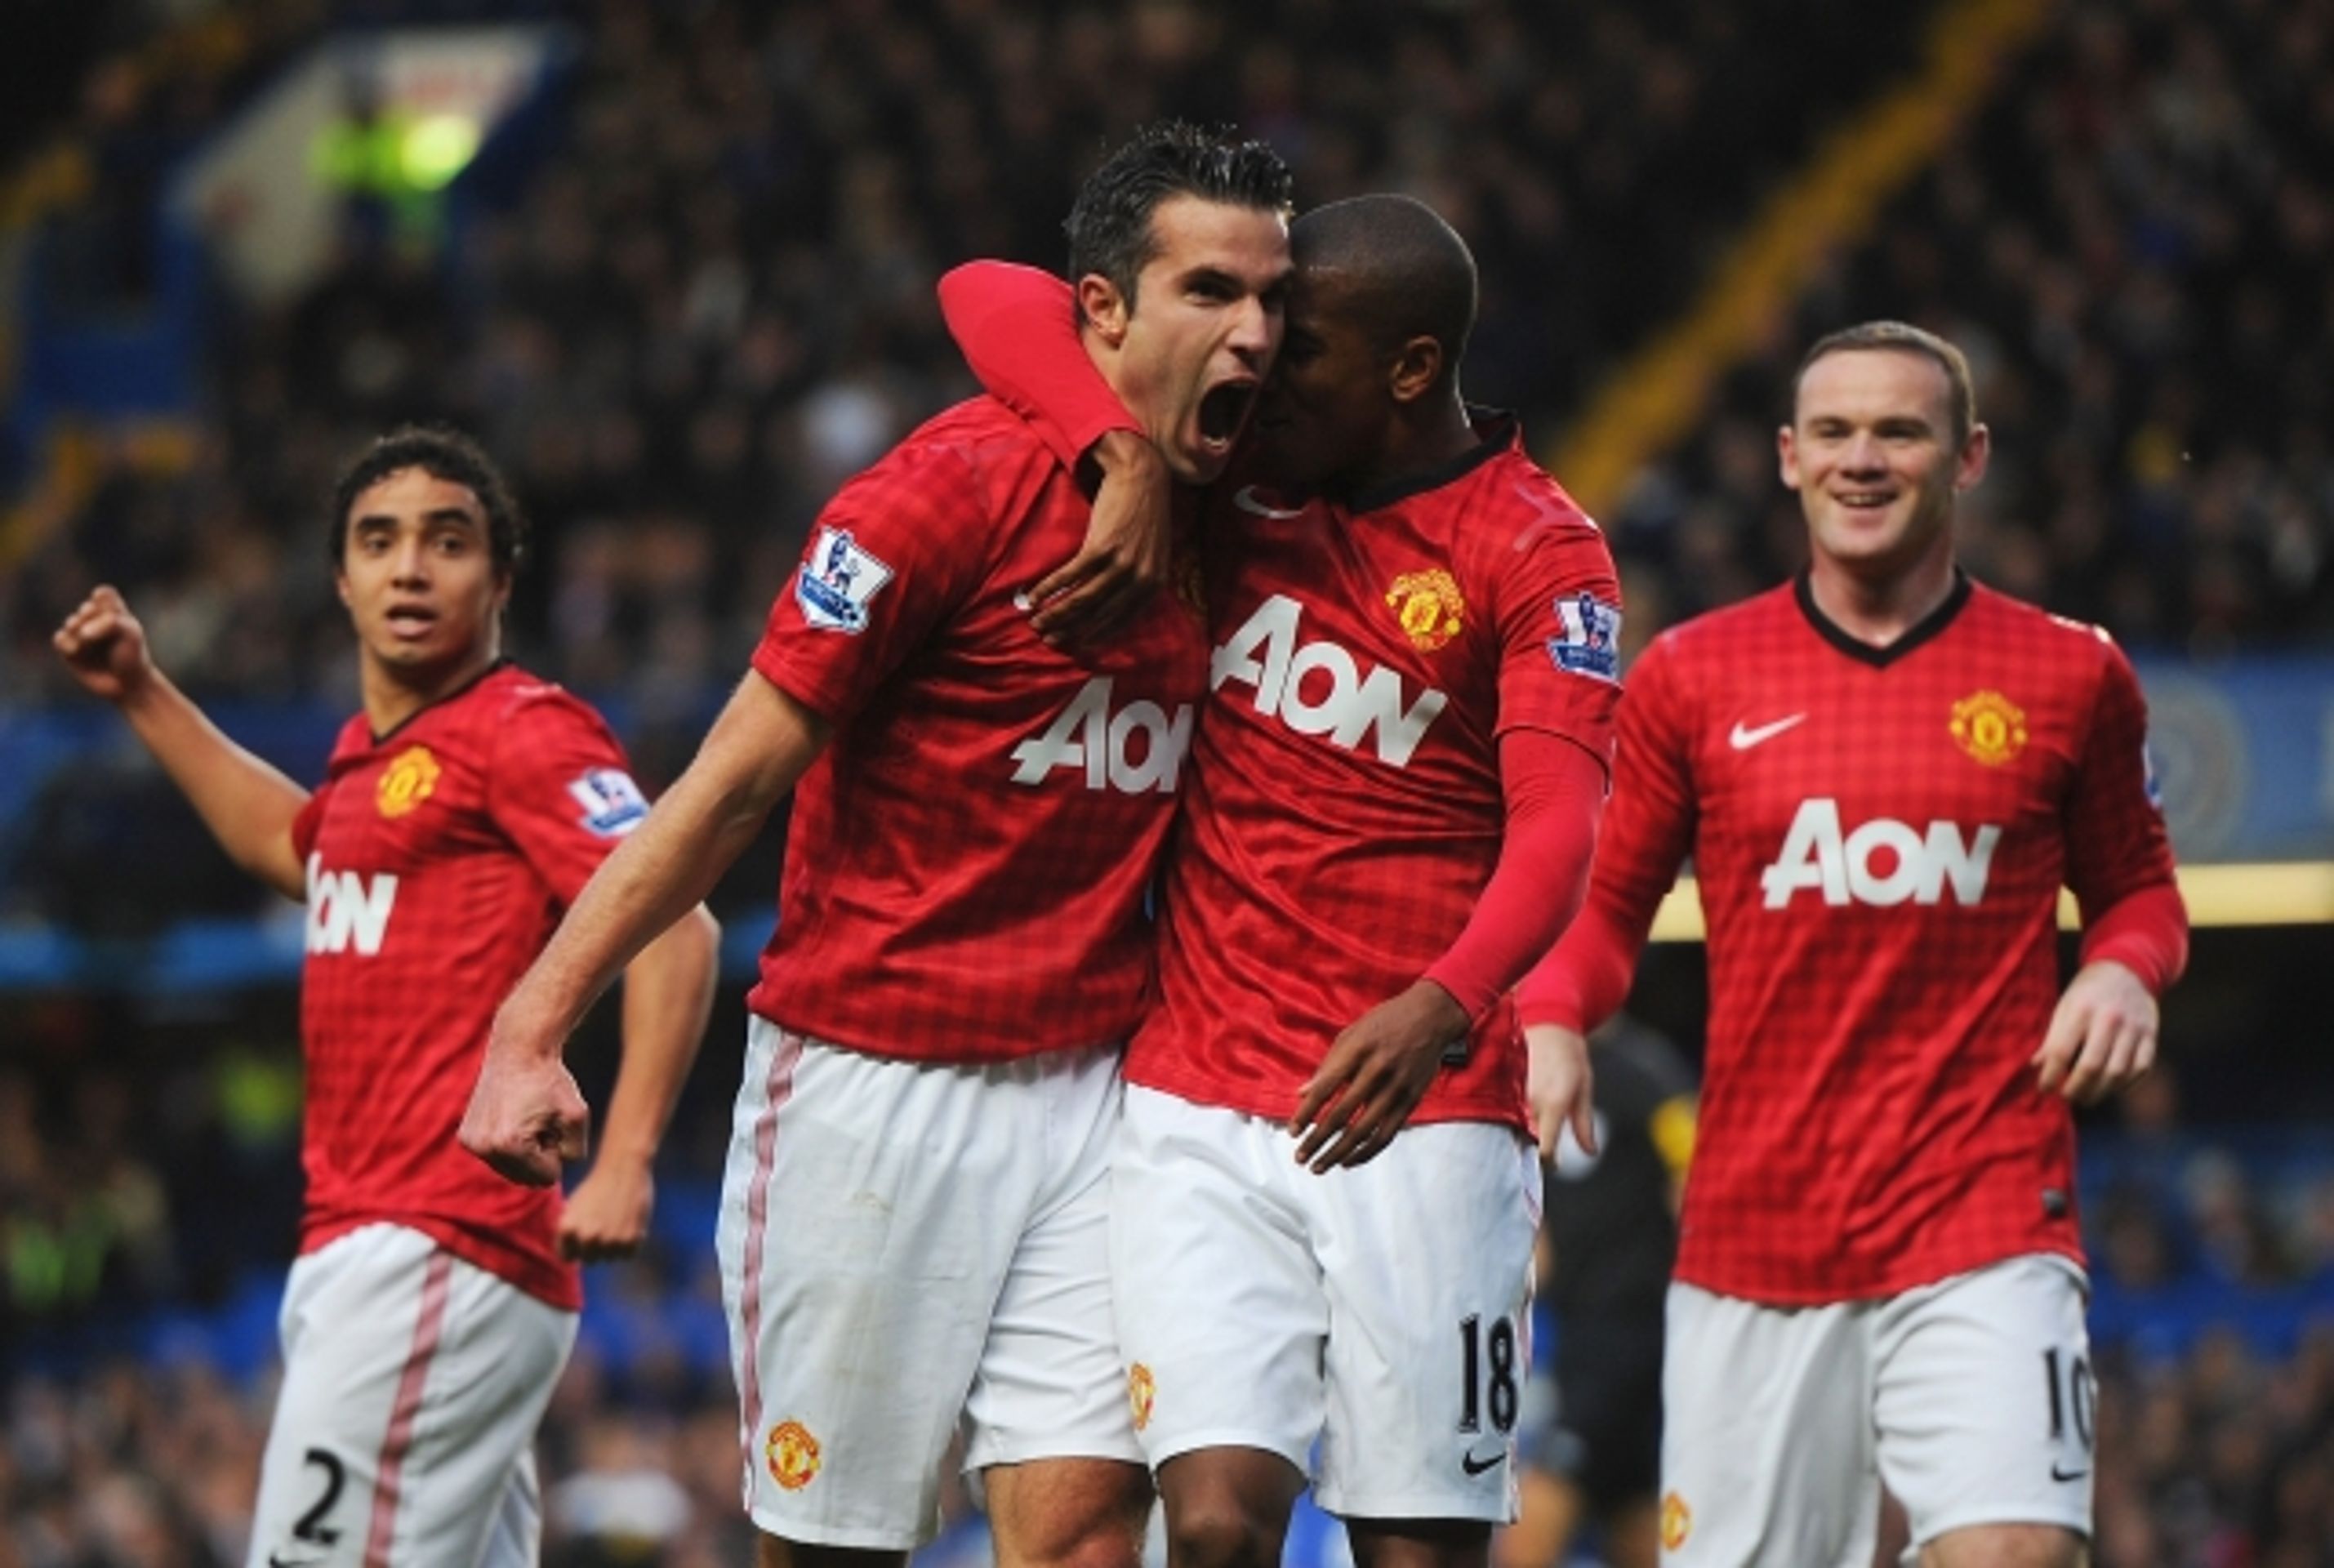 Chelsea - Manchester United 1 - GALERIE Chelsea - Manchester United 2:3 (1/13)